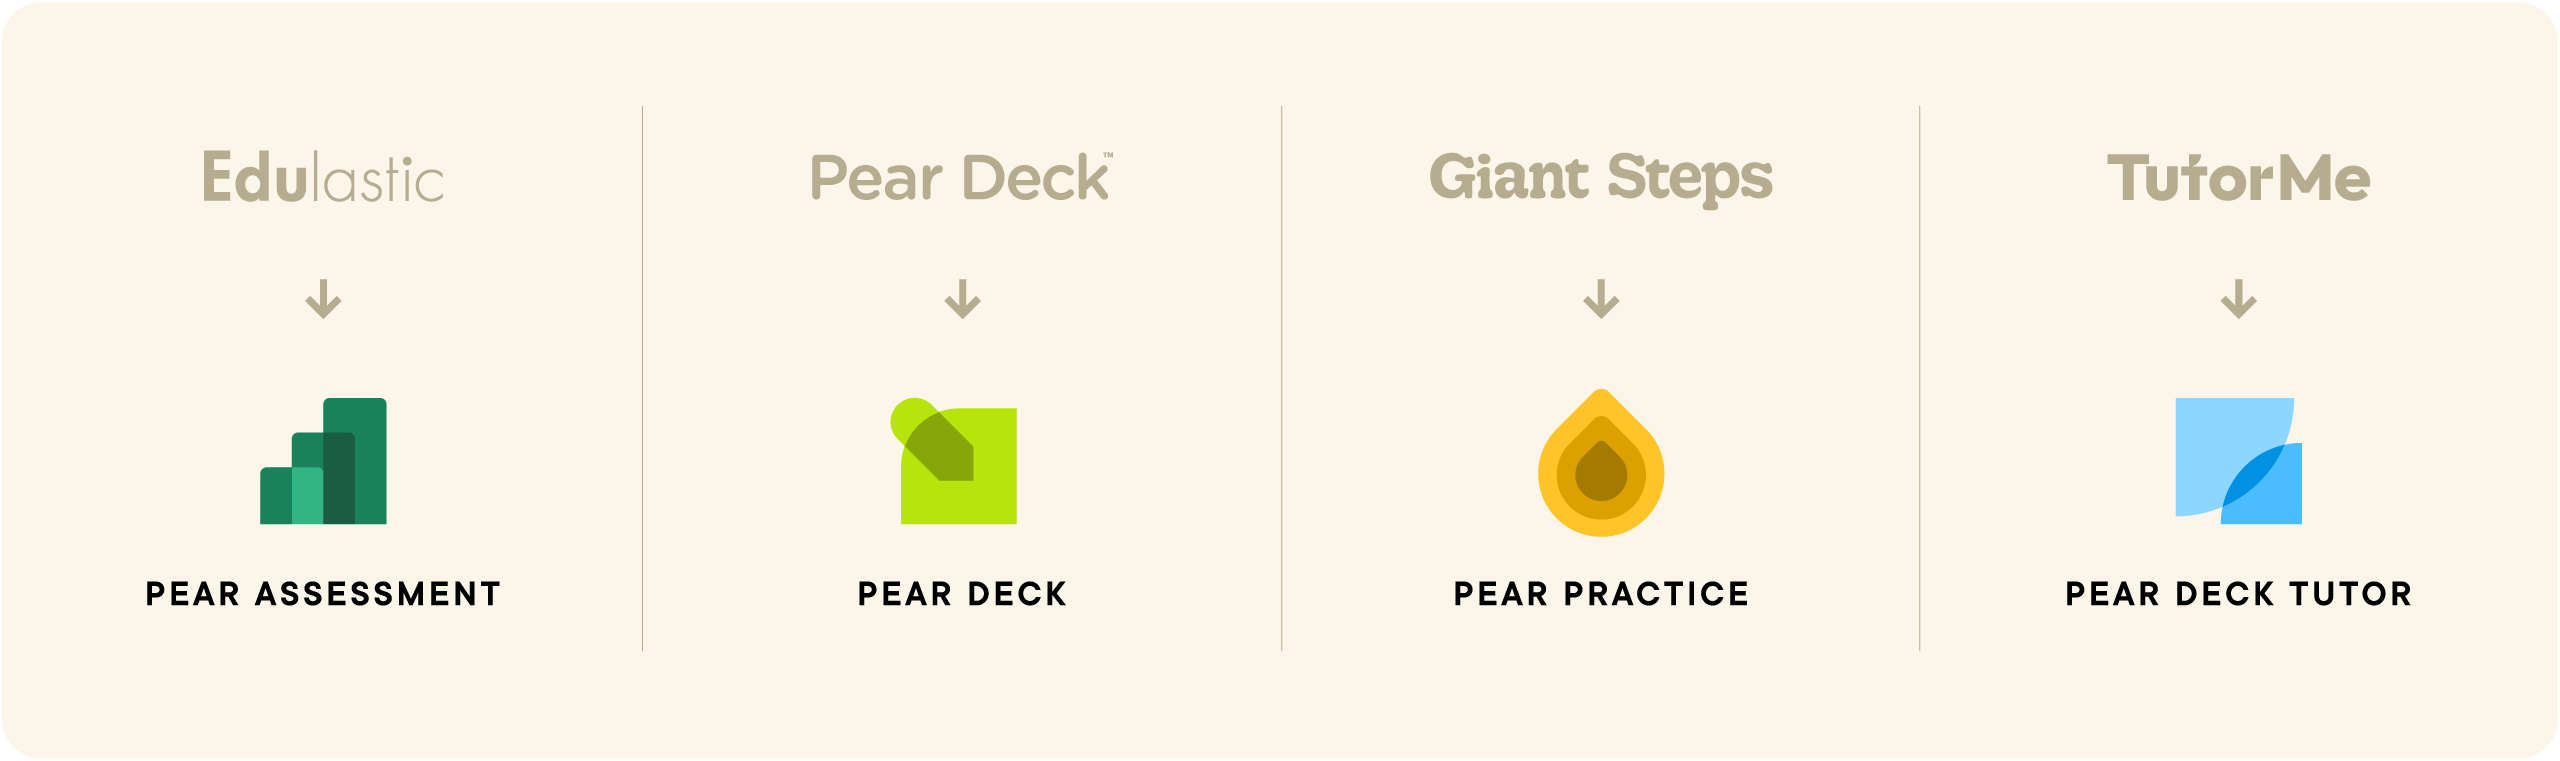 Pear Deck Learning Product Names: Edulastic to Pear Assessment, Pear Deck to Pear Deck, Giant Steps to Pear Practice, and TutorMe to Pear Deck Tutor